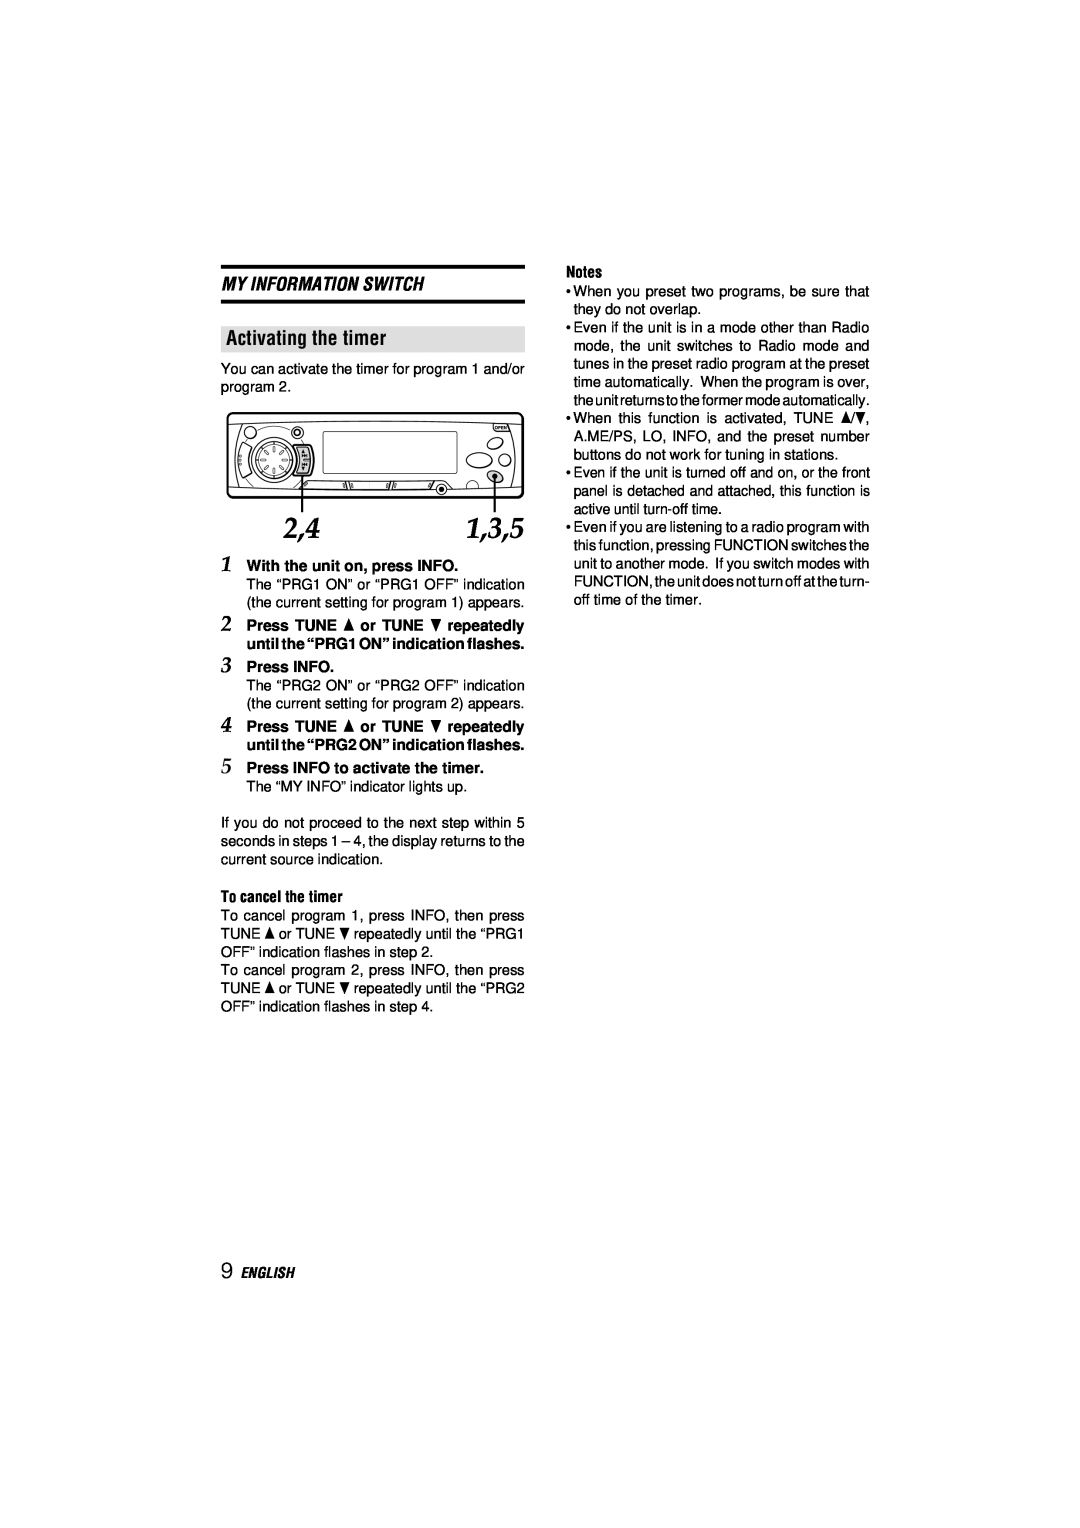 Aiwa CDC-MP3 manual When you preset two programs, be sure that they do not overlap 